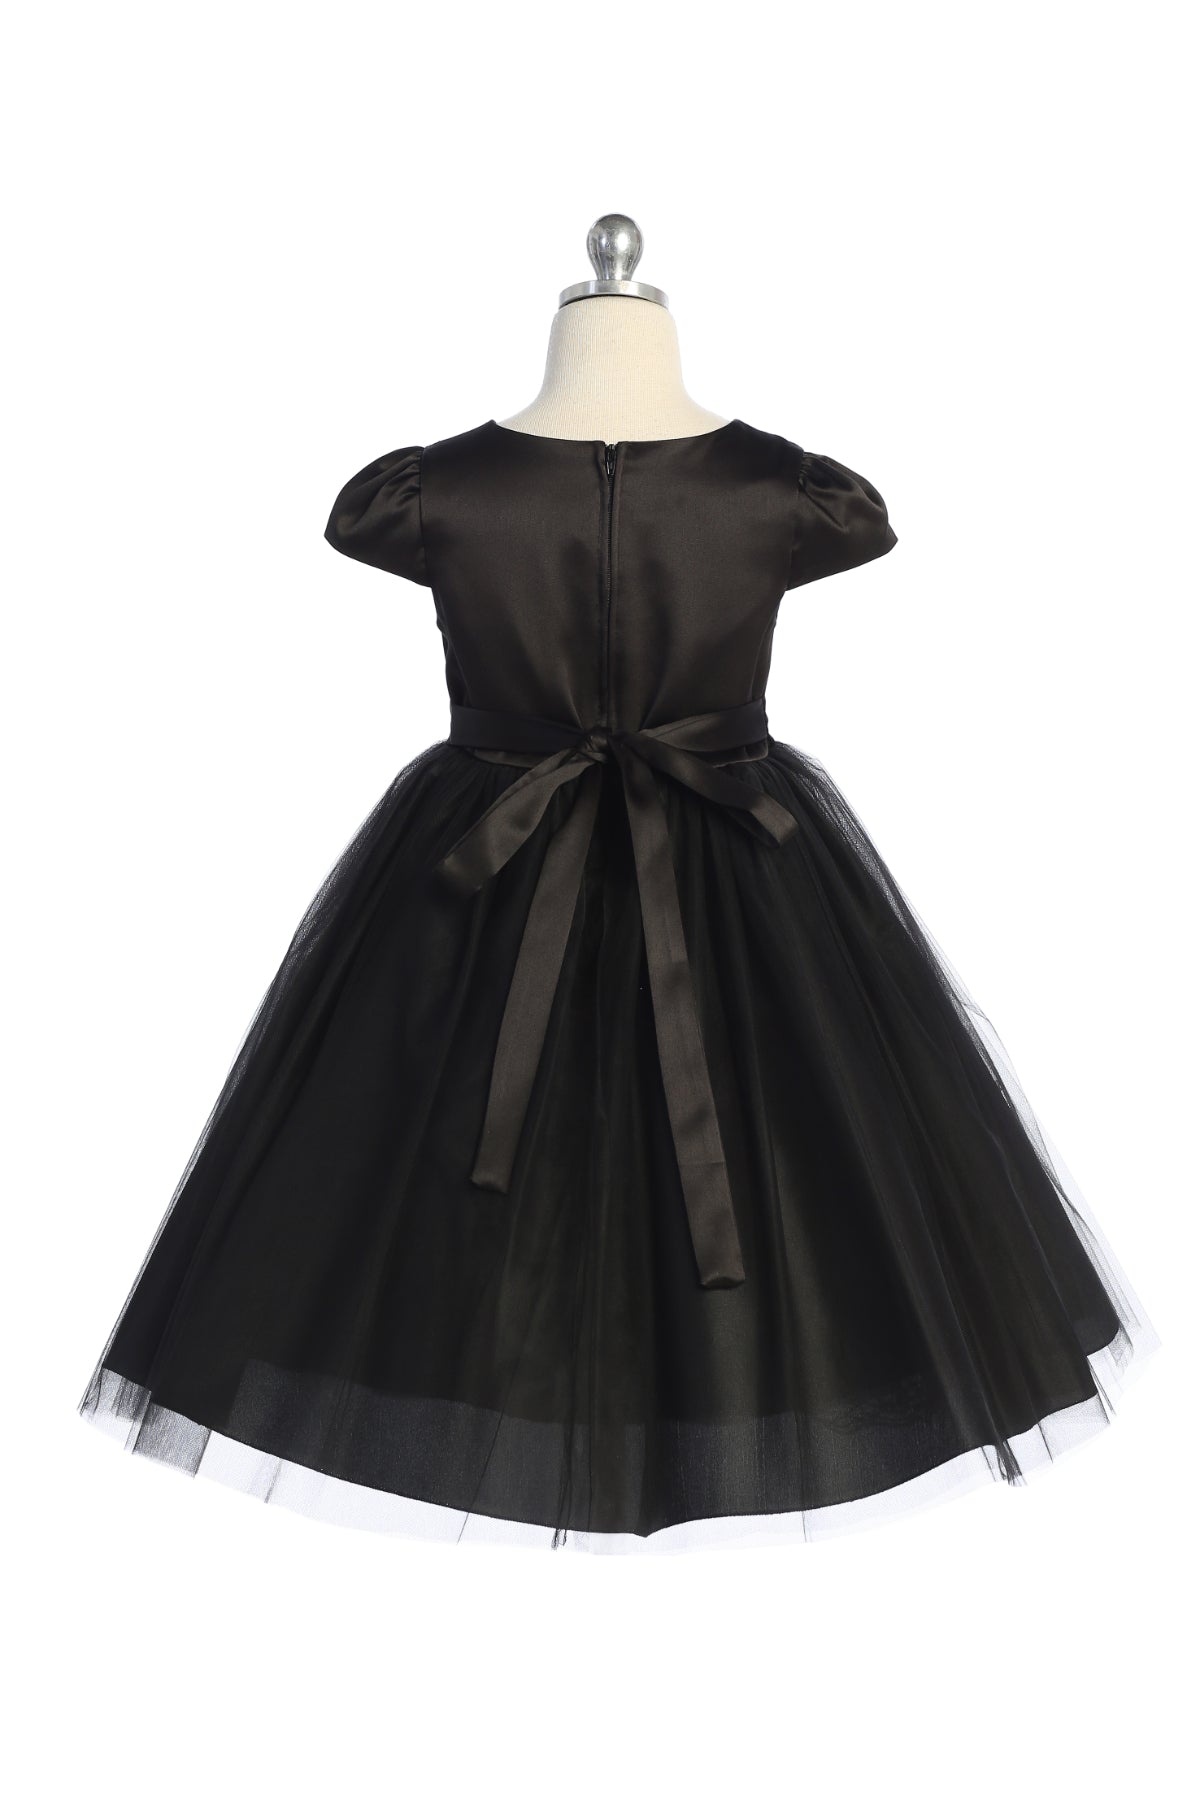 452-A Capped Sleeve Satin & Tulle Girls Dress with Rhinestone Trim and Plus Sizes